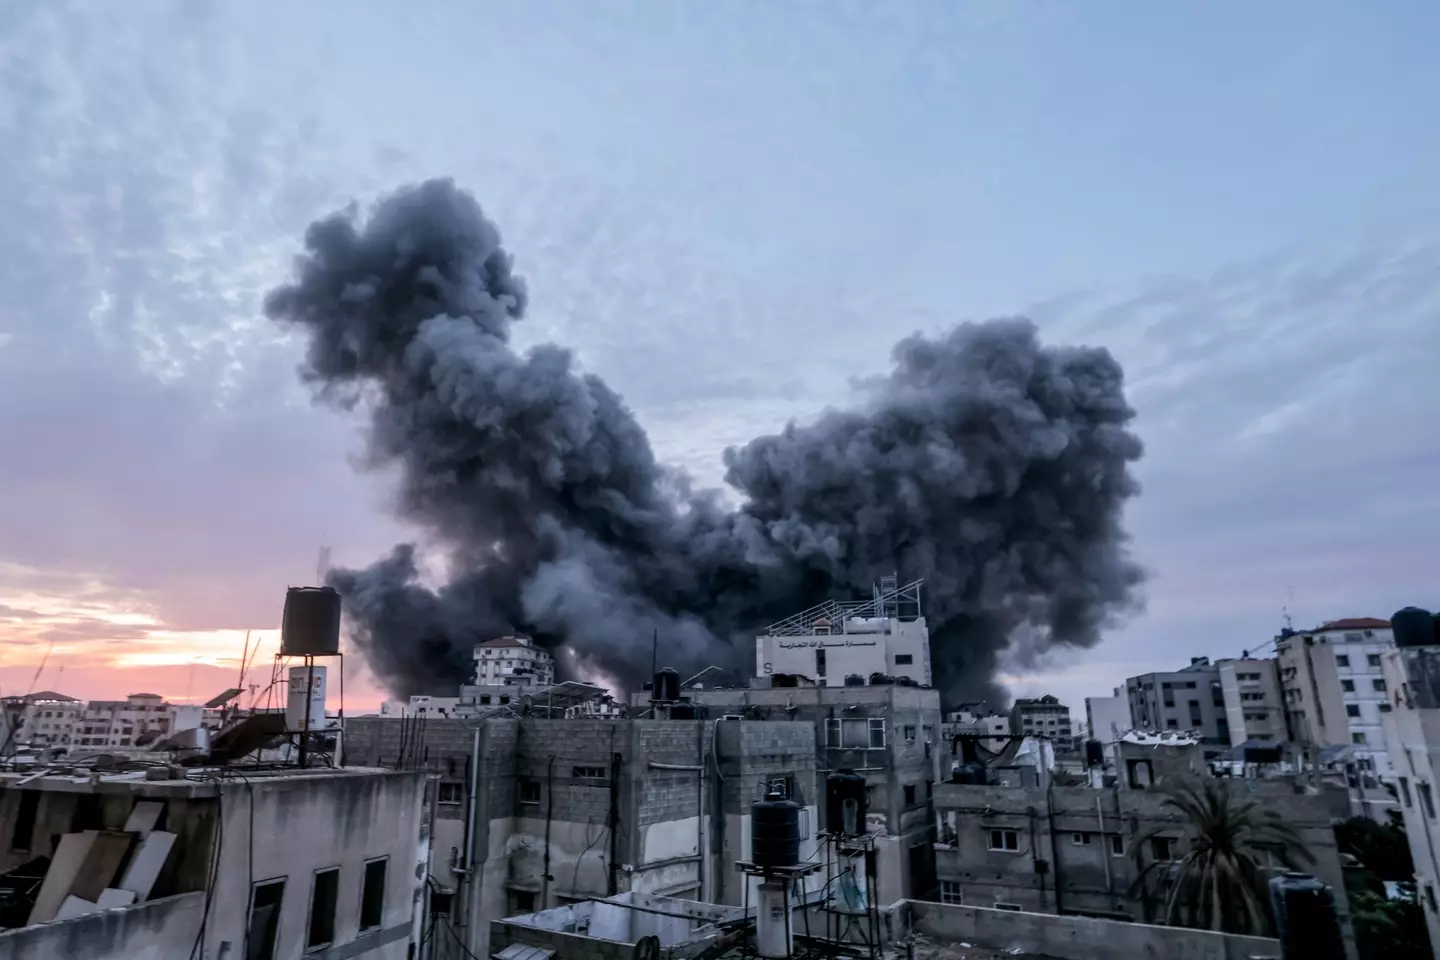 Hamas fired thousands of rockets at Israel, with airstrikes on the Gaza Strip made in retaliation.